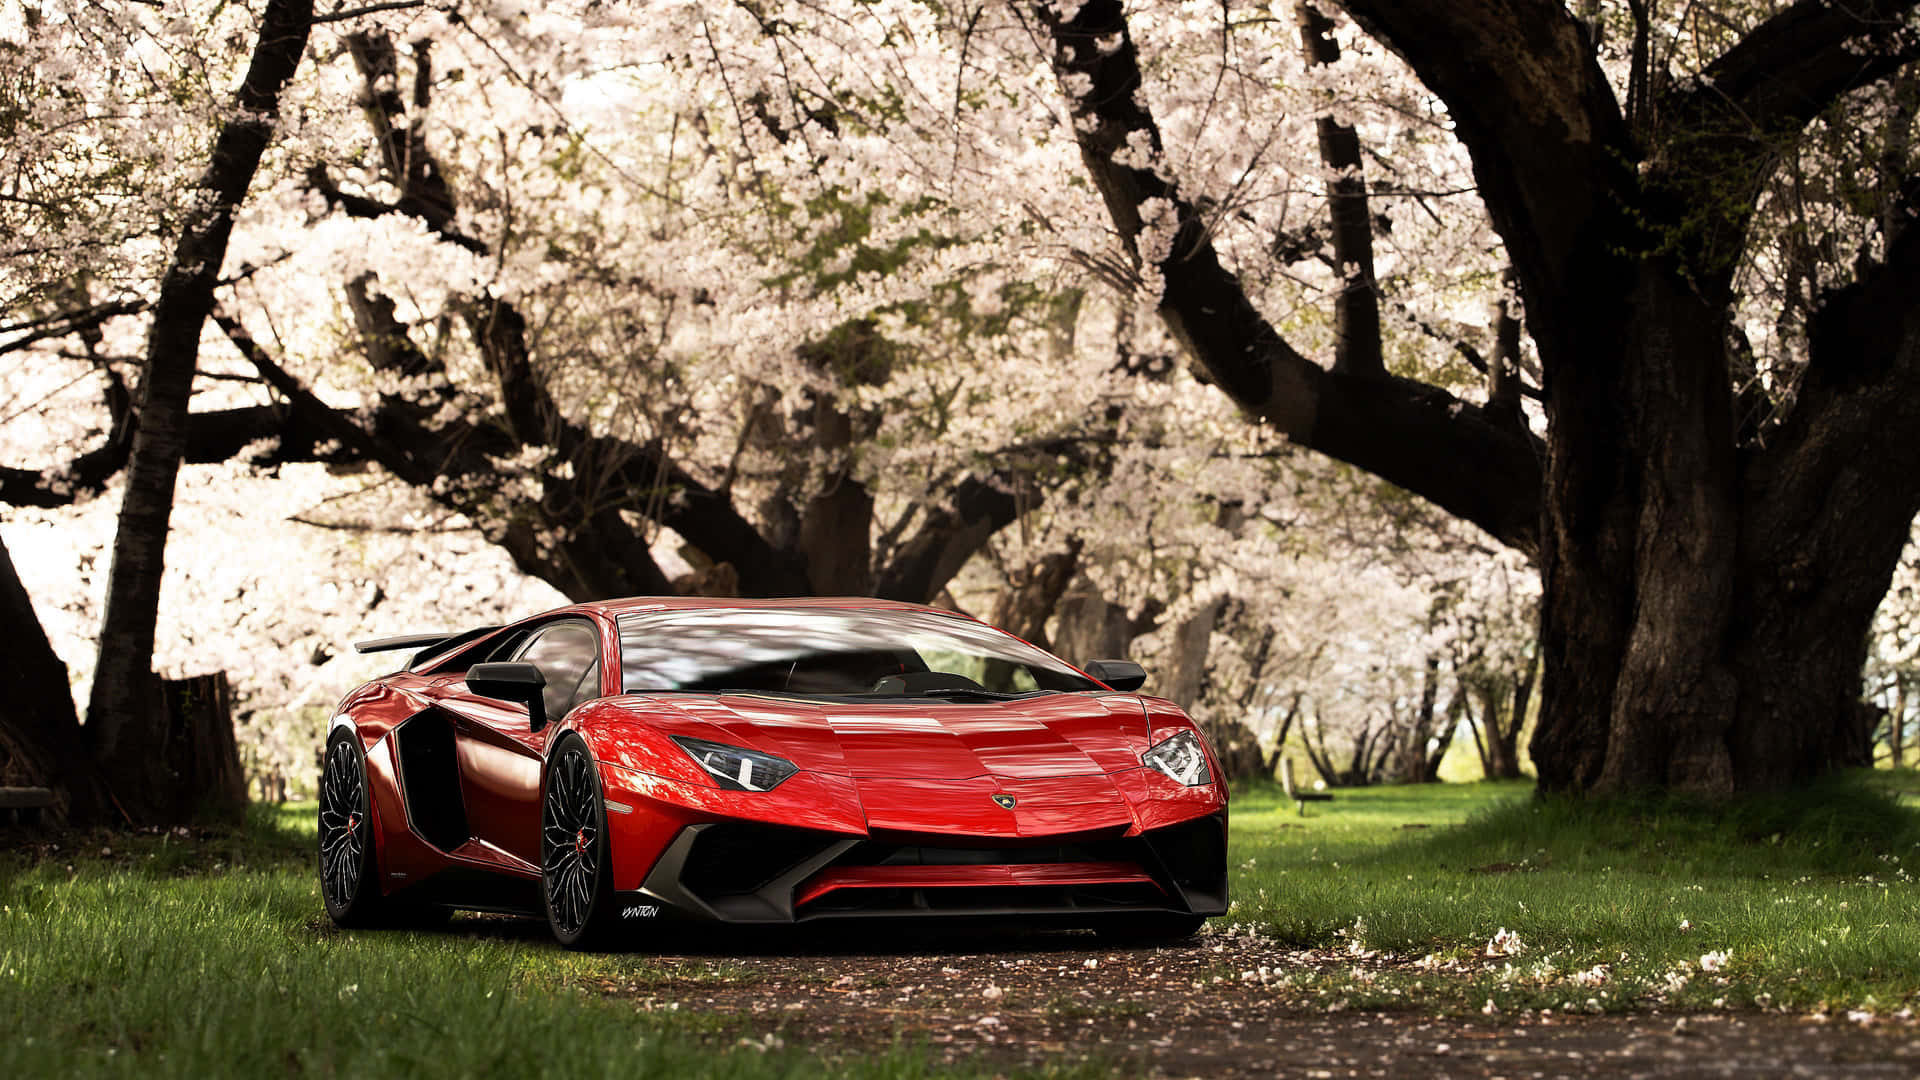 A Red Sports Car Parked In A Field With Cherry Trees Wallpaper